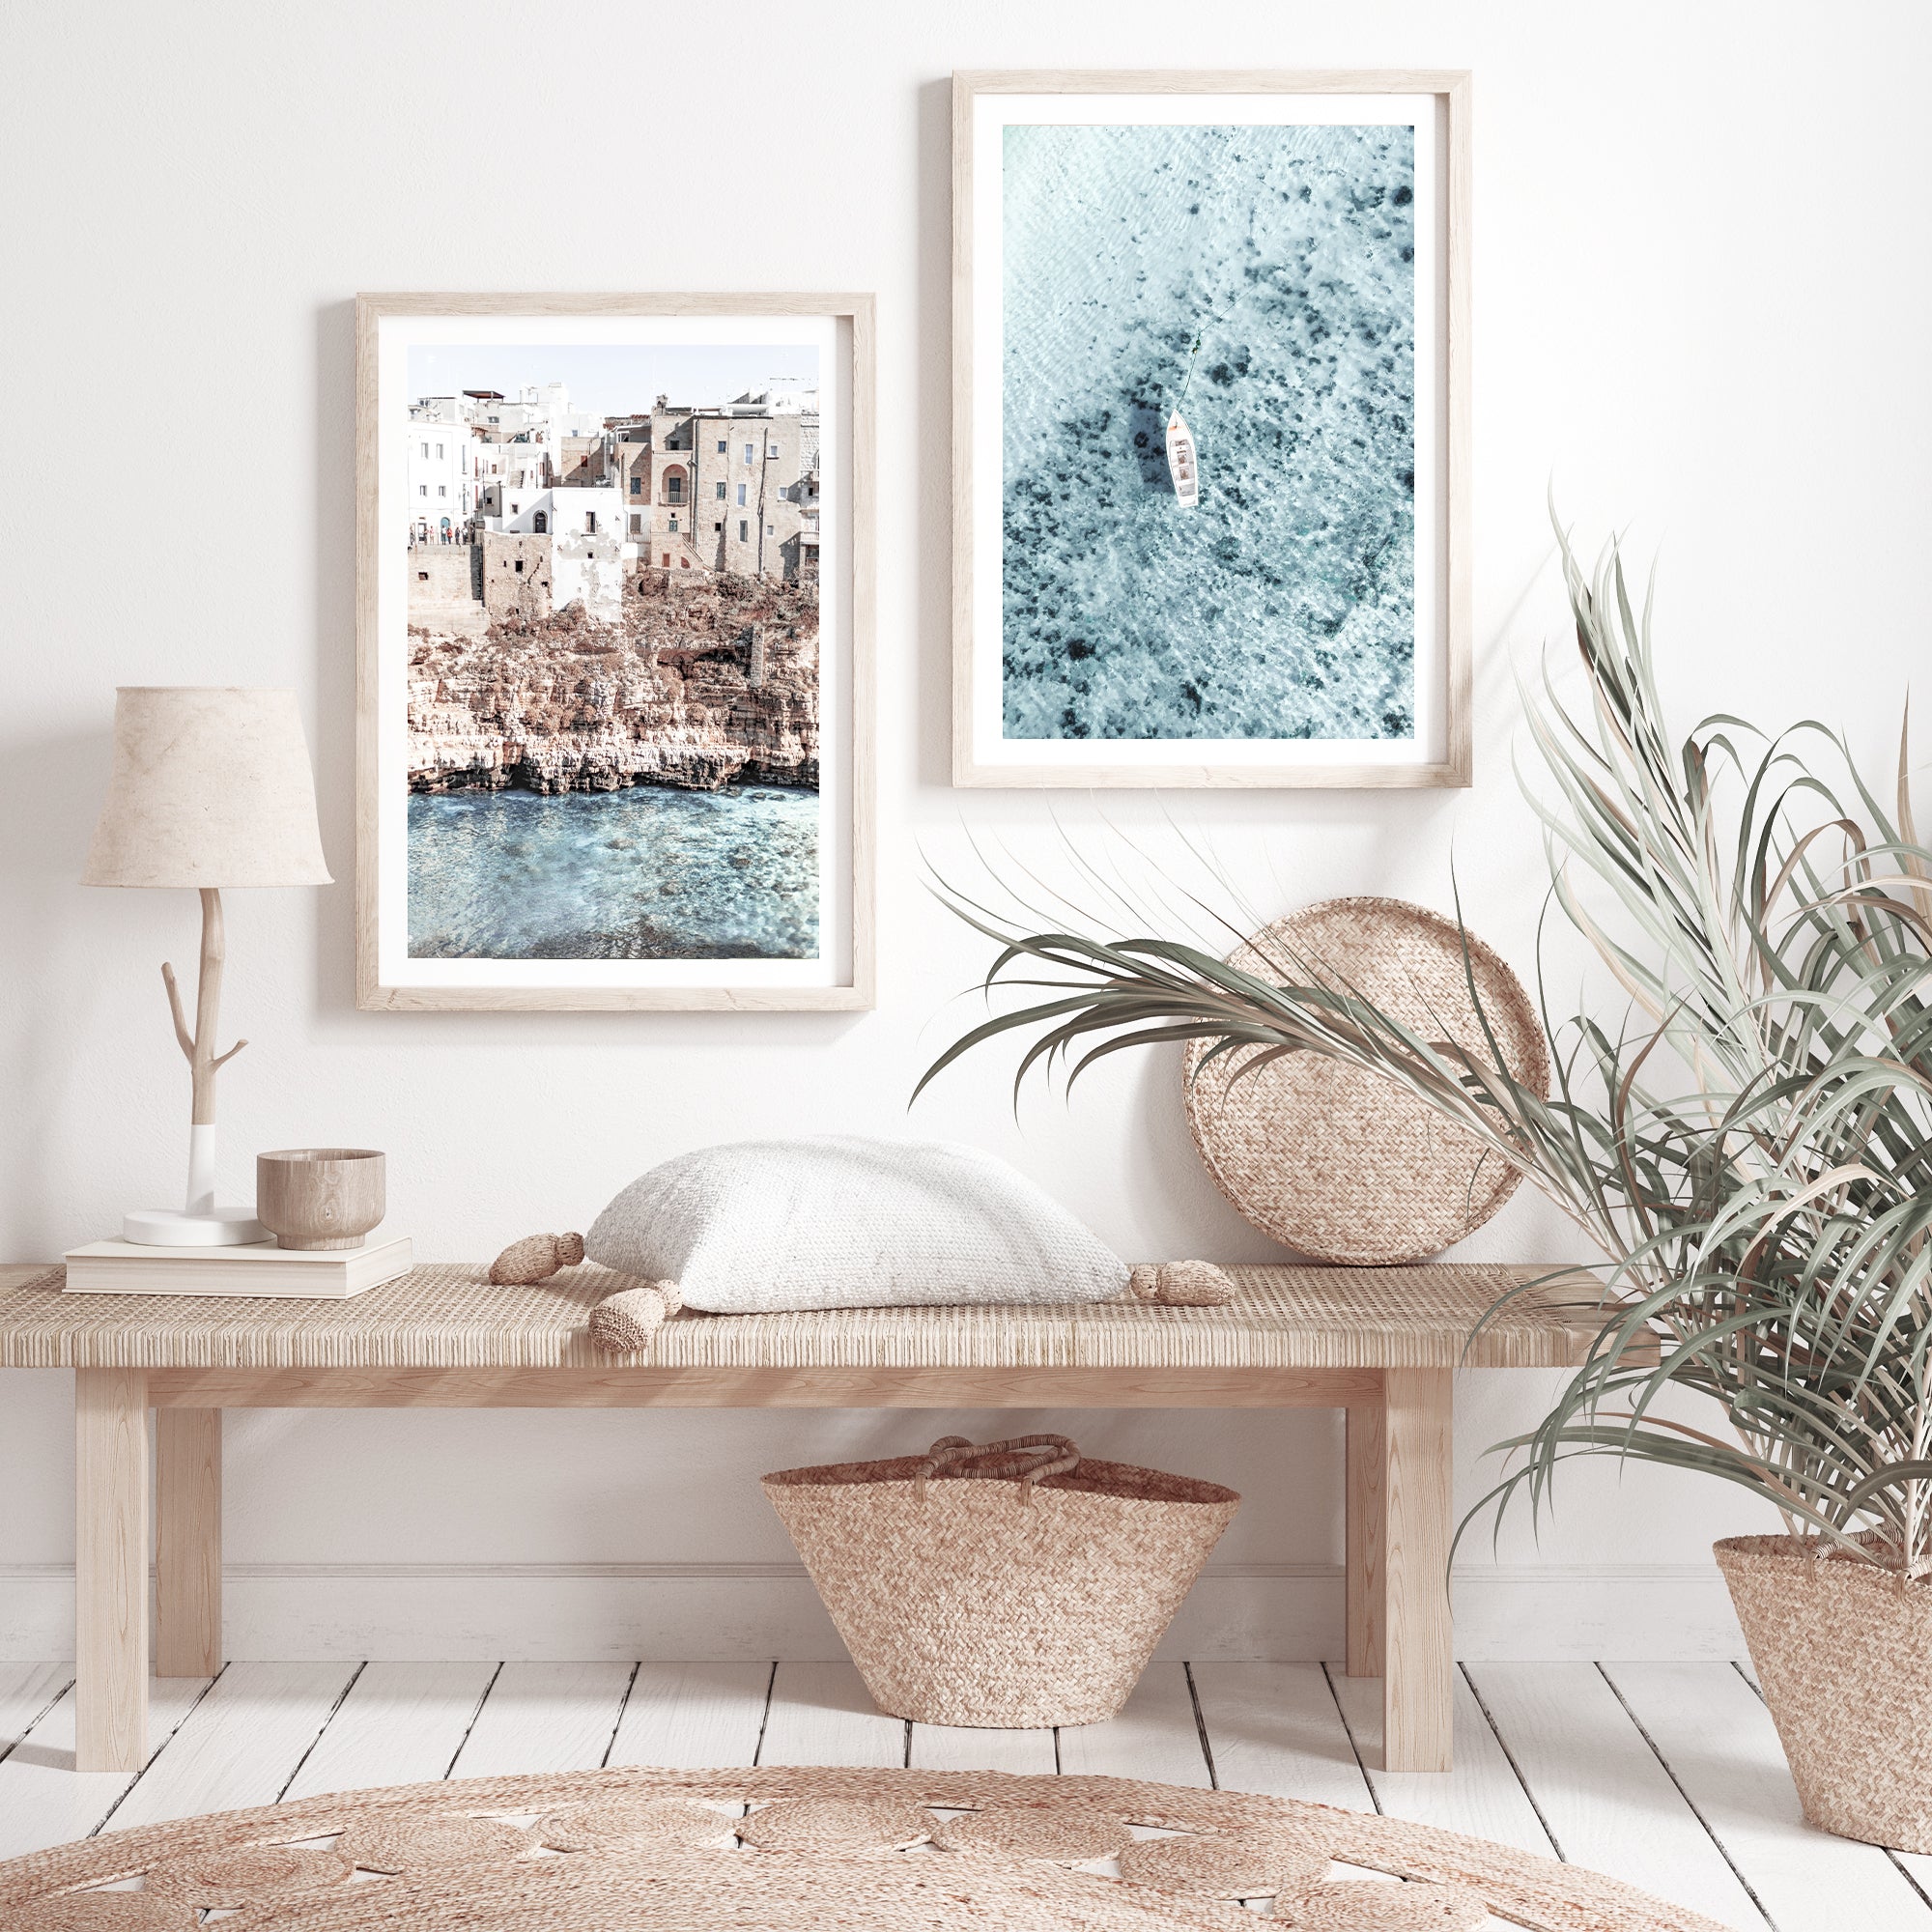 A set of 2 Coastal Wall Art Amalfi Cliffs and Clear Blue Ocean , available in print with no frame.